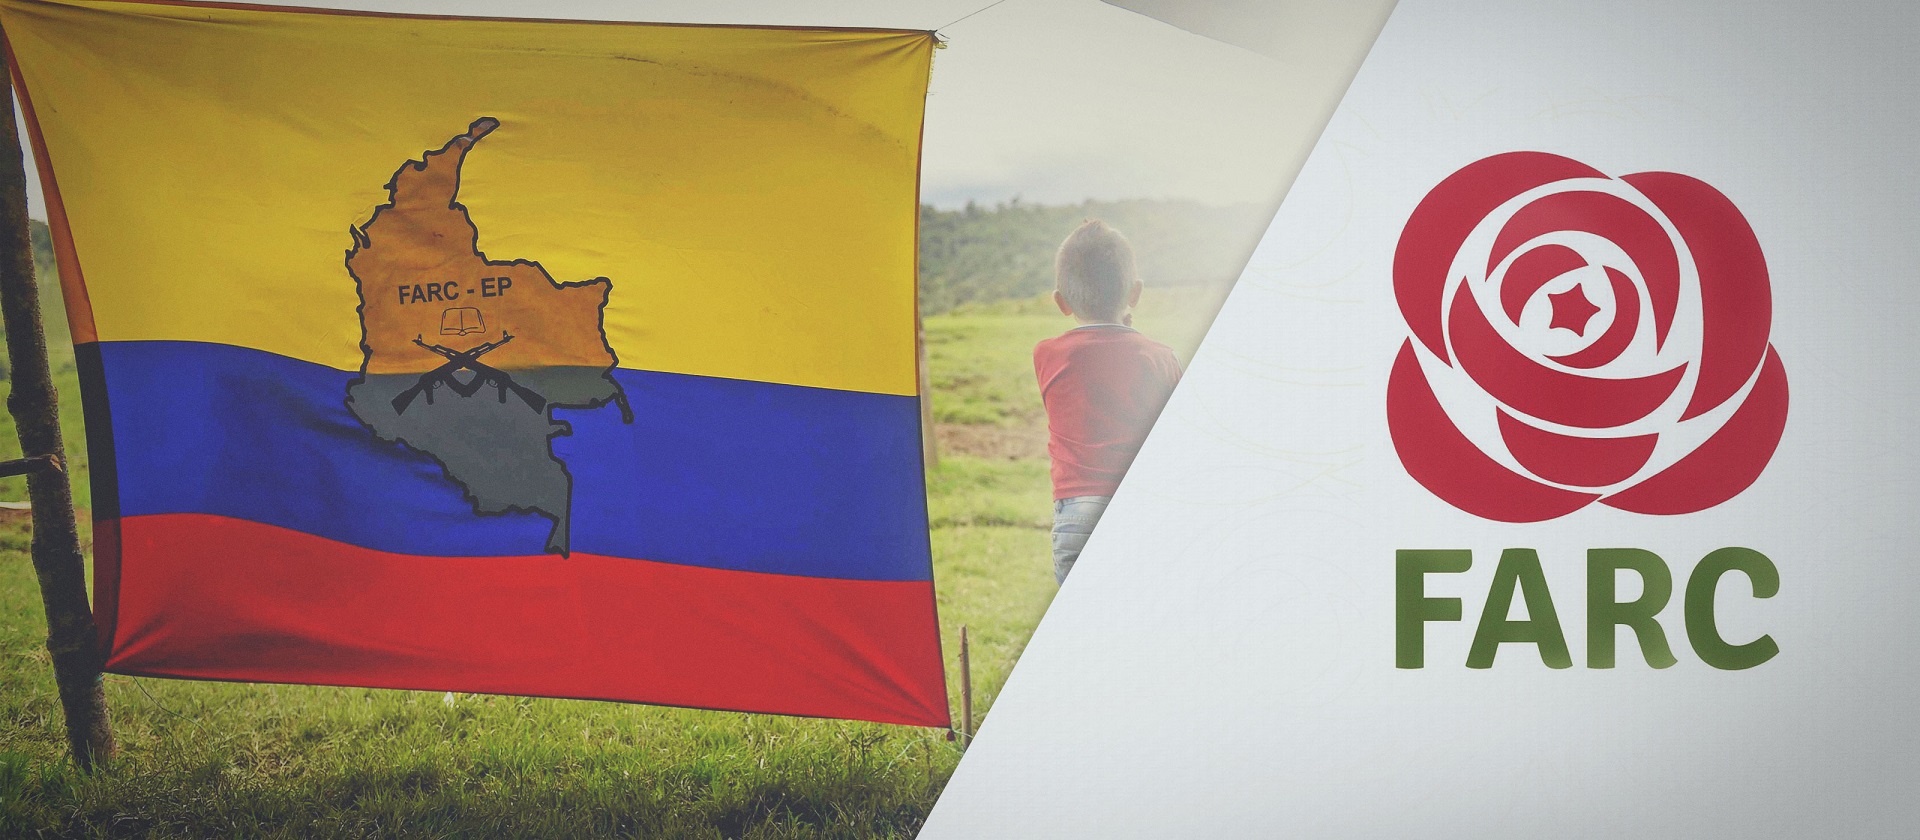 The Heat: FARC – From rebels to Colombia’s newest political party